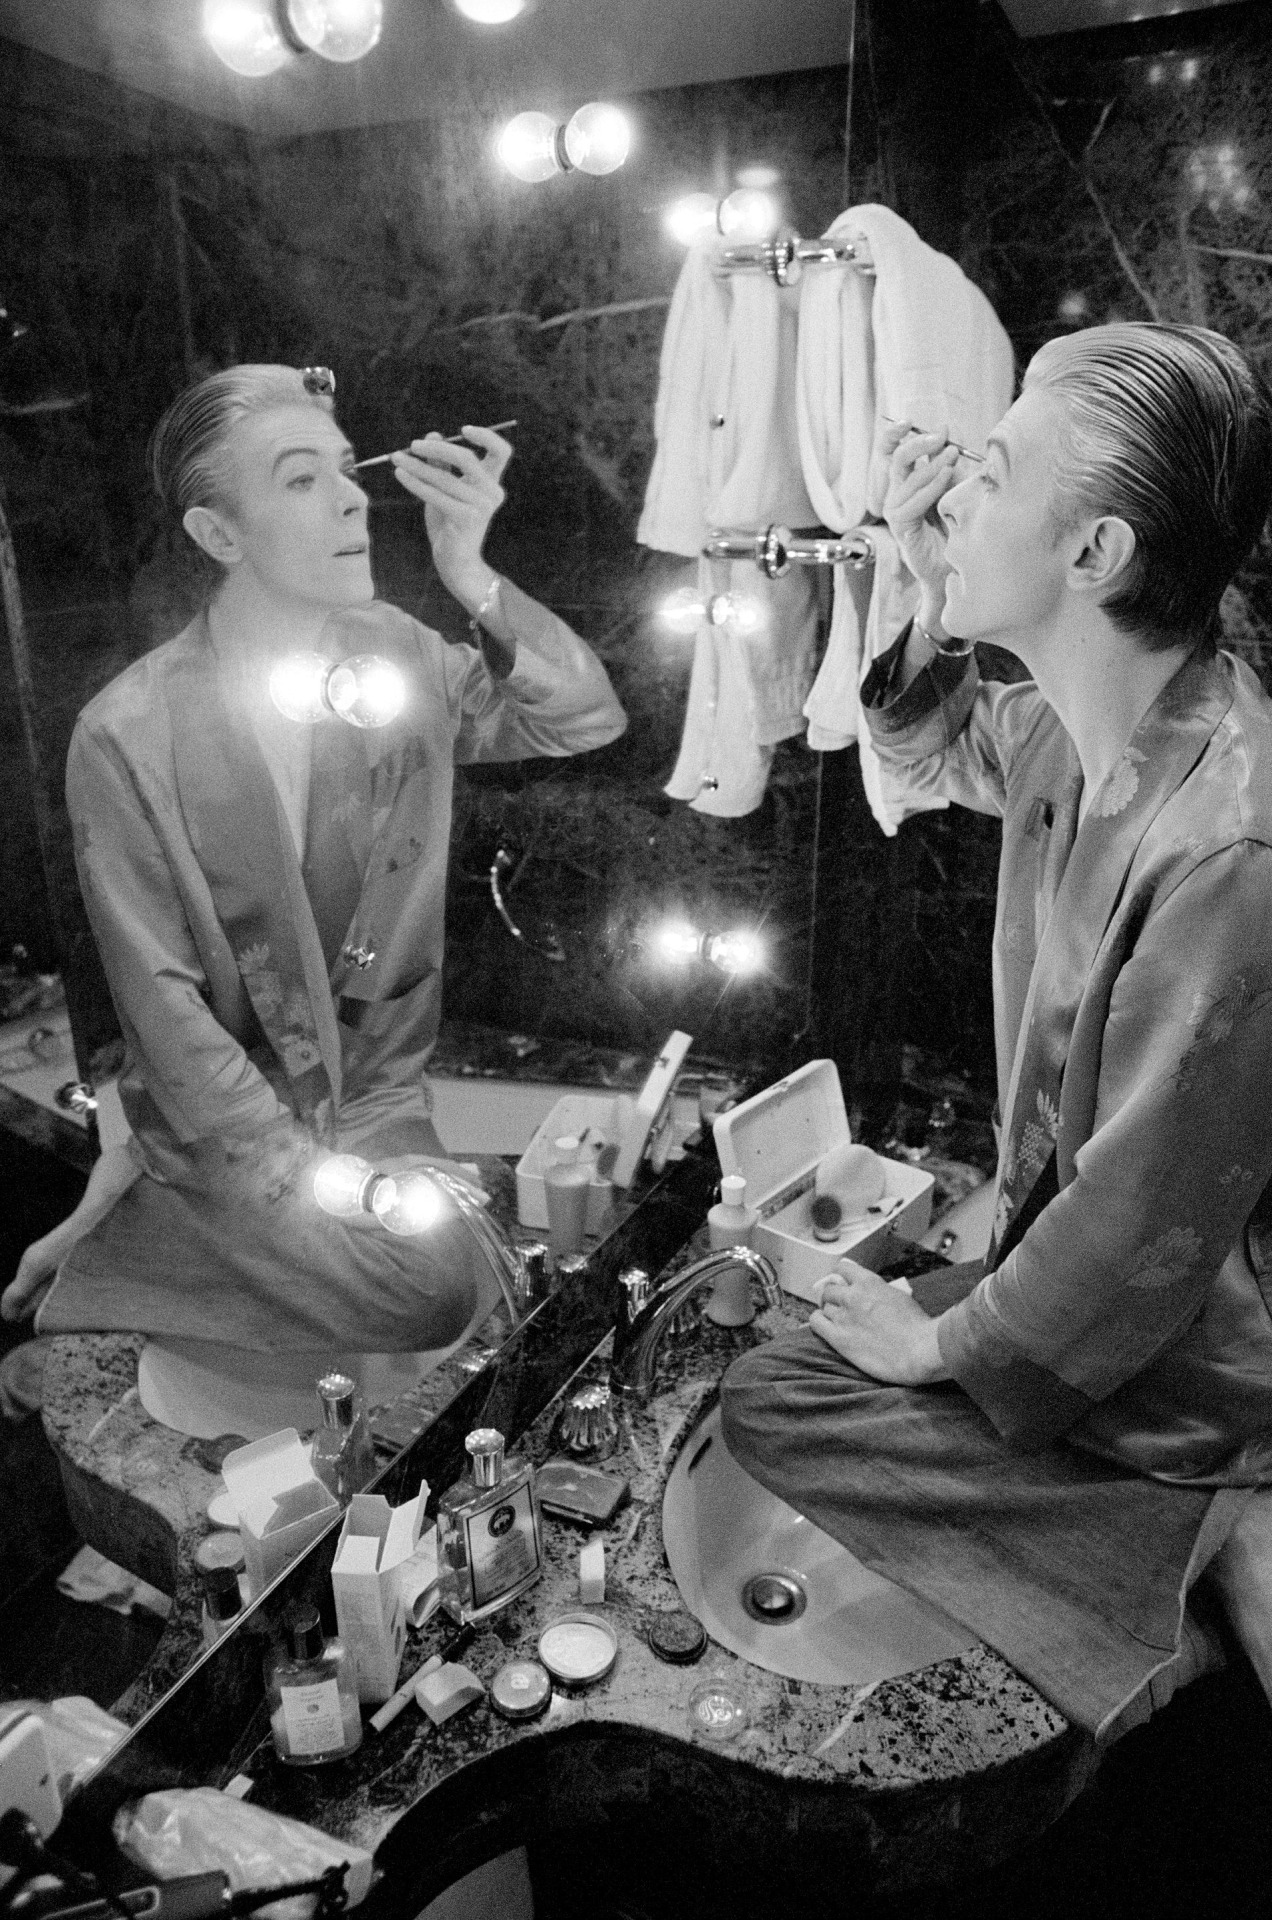 David Bowie prepares his make-up at L’Hotel in Paris ahead of photo shoot in 1976